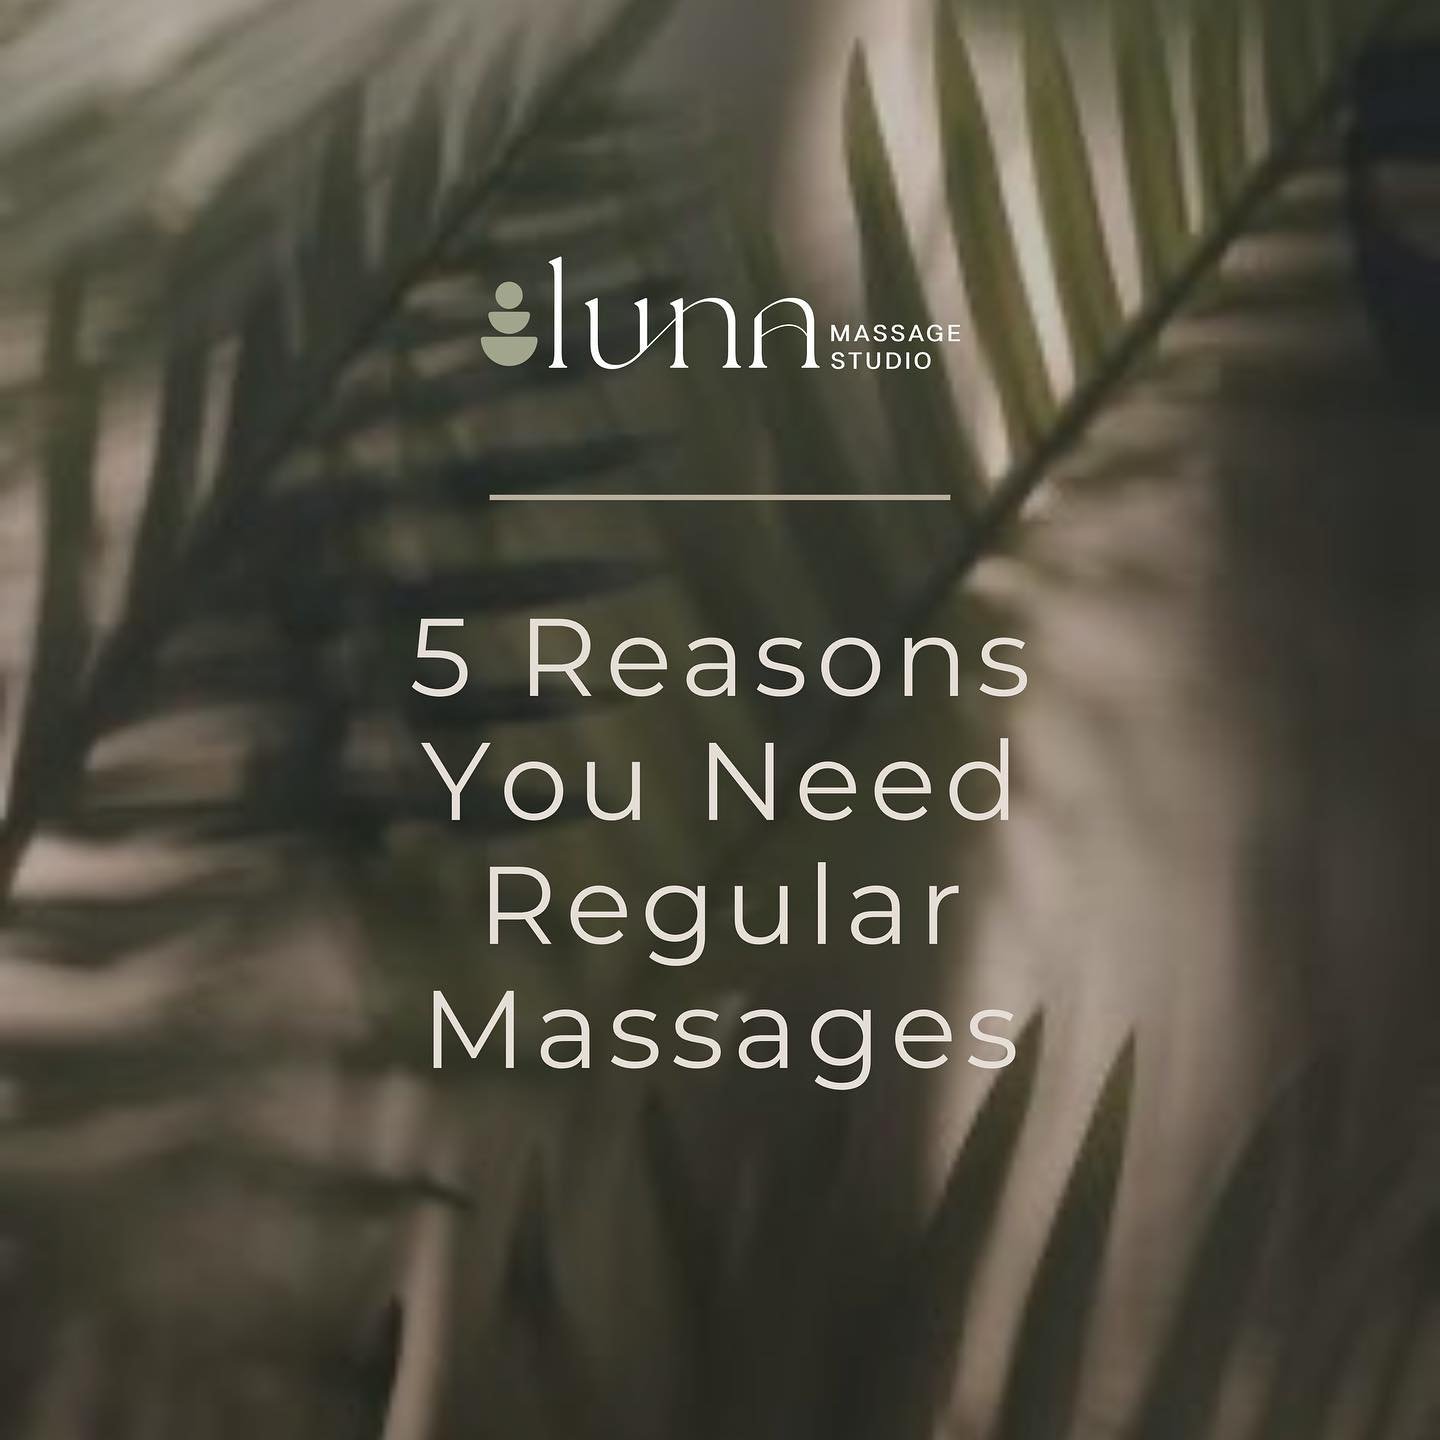 Investing in your well-being through regular massage is the best form of self care! 

Book your next massage and work towards a more relaxed, agile, resilient, and beautiful you!! ✨